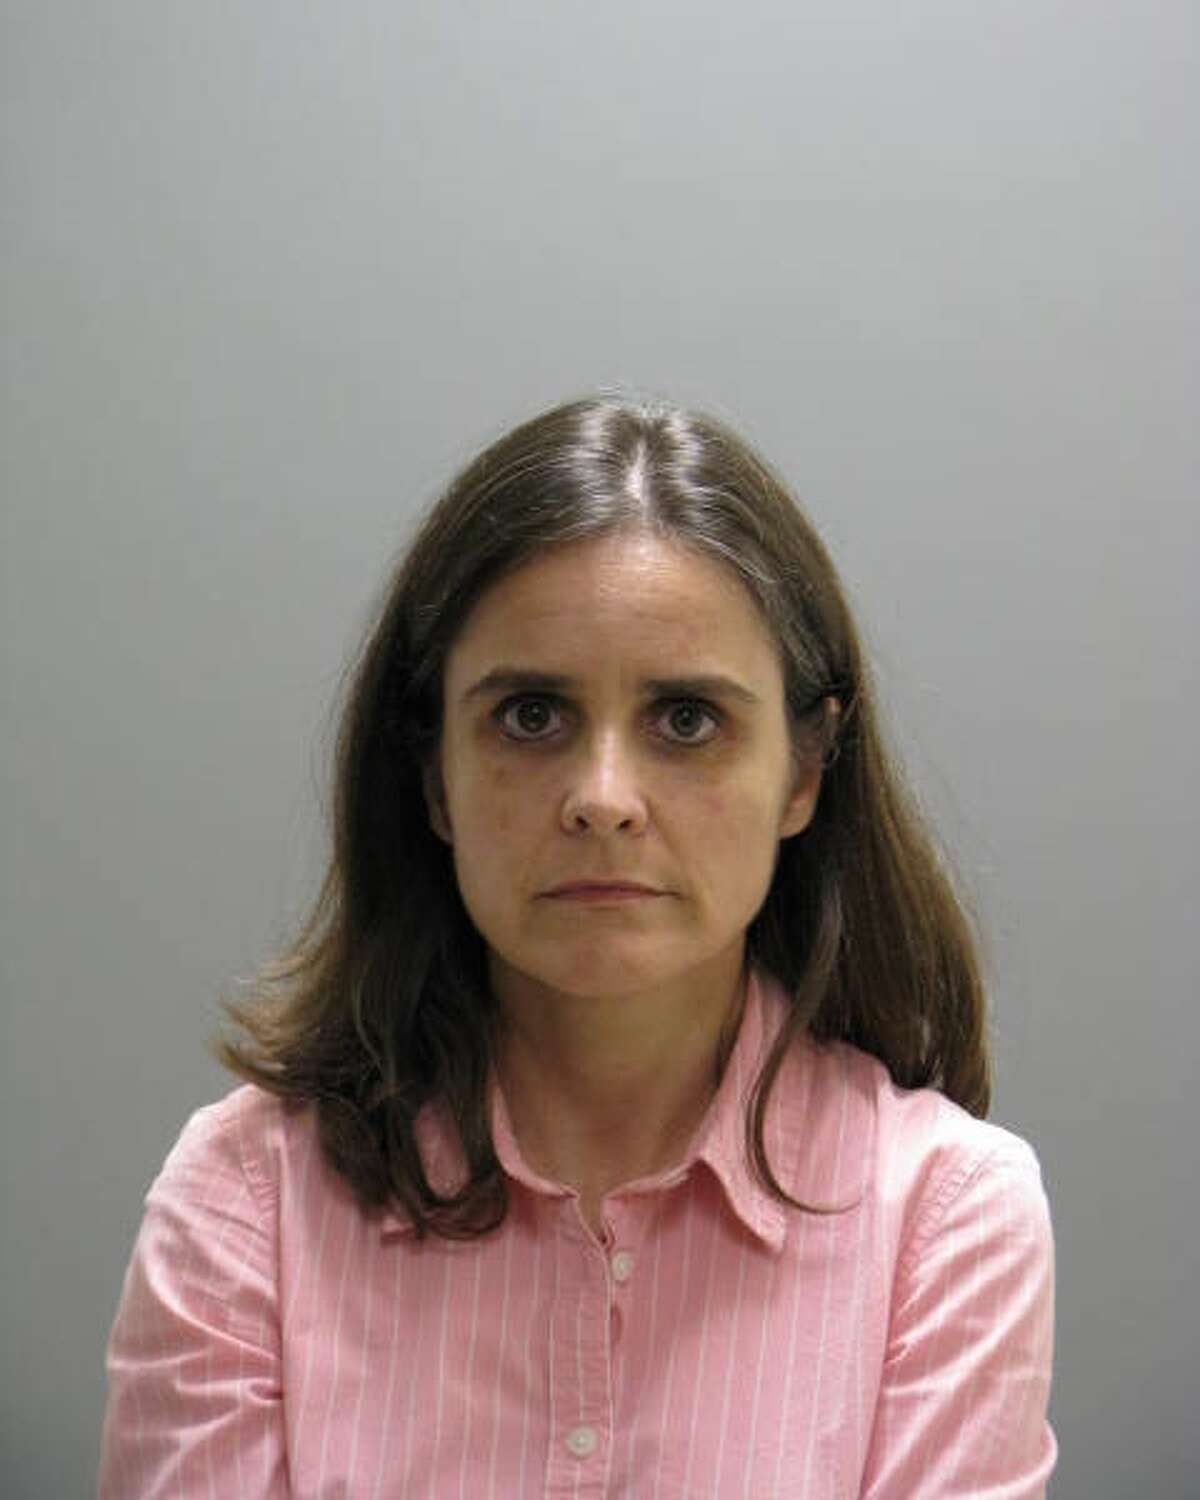 Ana Maria Gonzalez-Angulo, a breast cancer oncologist at the University of Texas M.D. Anderson Cancer Center, was charged last week with aggravated assault against Dr. George Blumenschein, a specialist in lung and head and neck cancers at the institution.